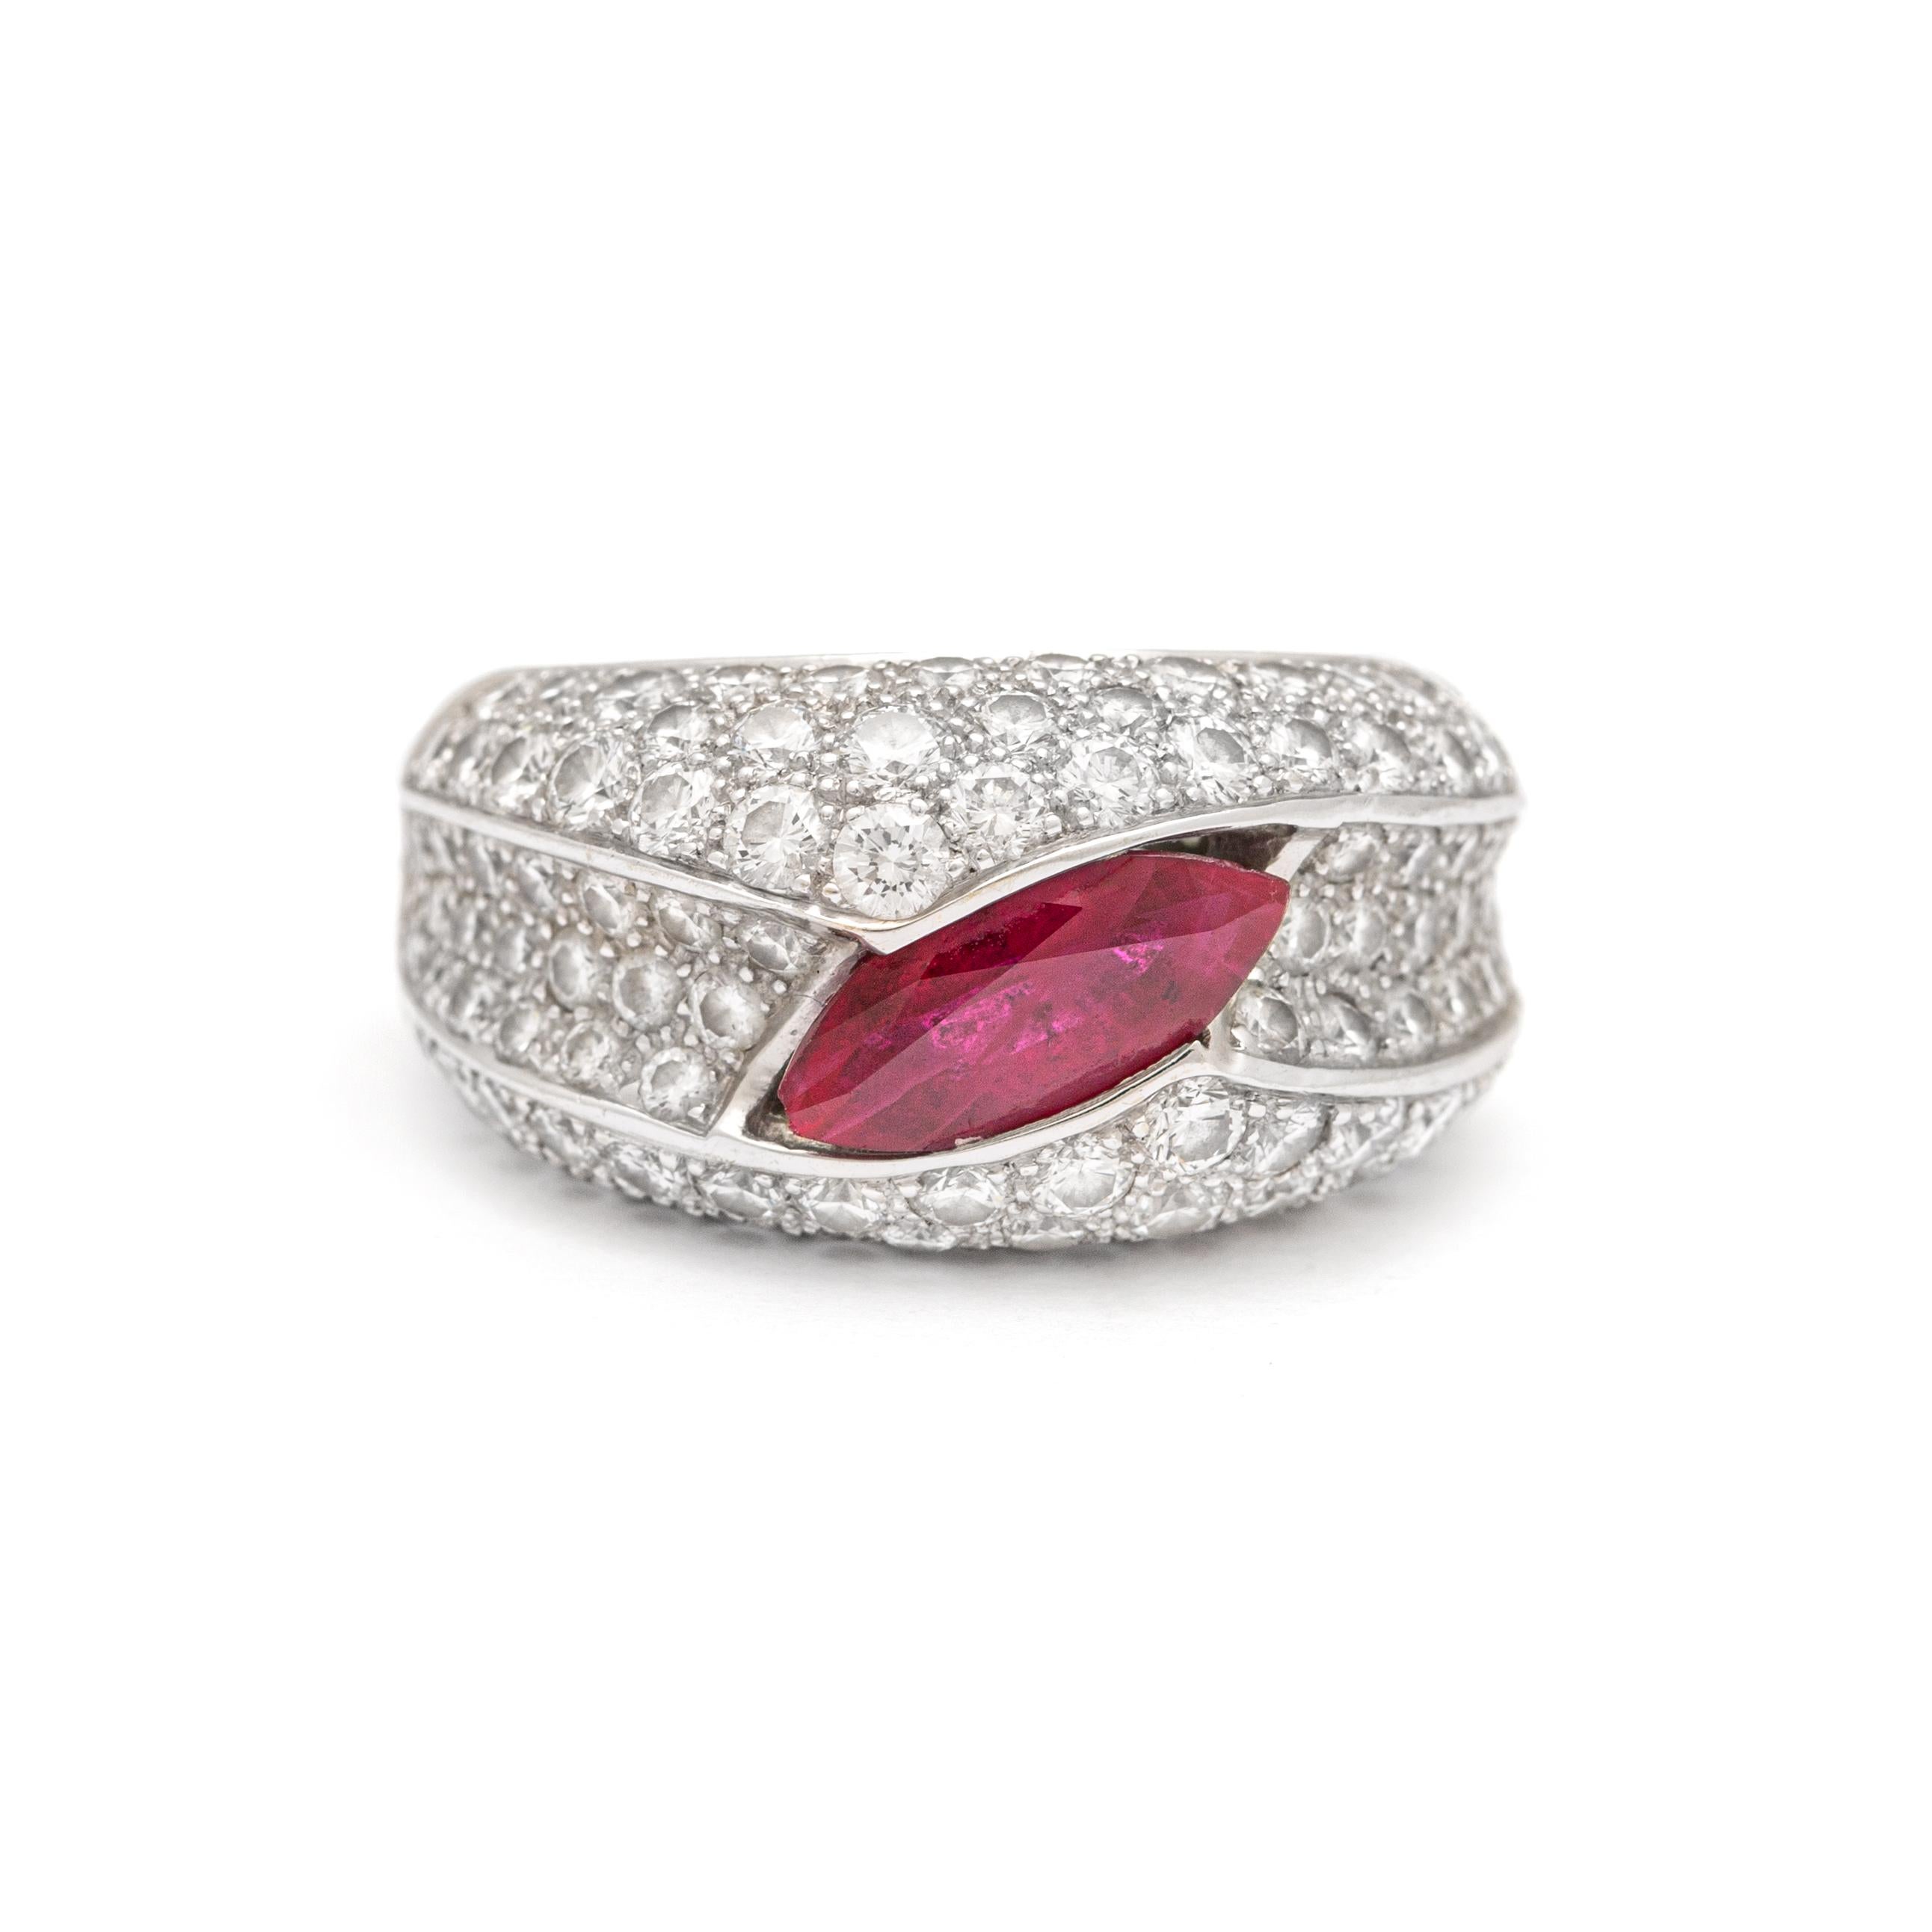 Adler Ruby and Diamond White Gold 18K Ring.
Ring size: 6 US.
Weight: 13.21 grams.